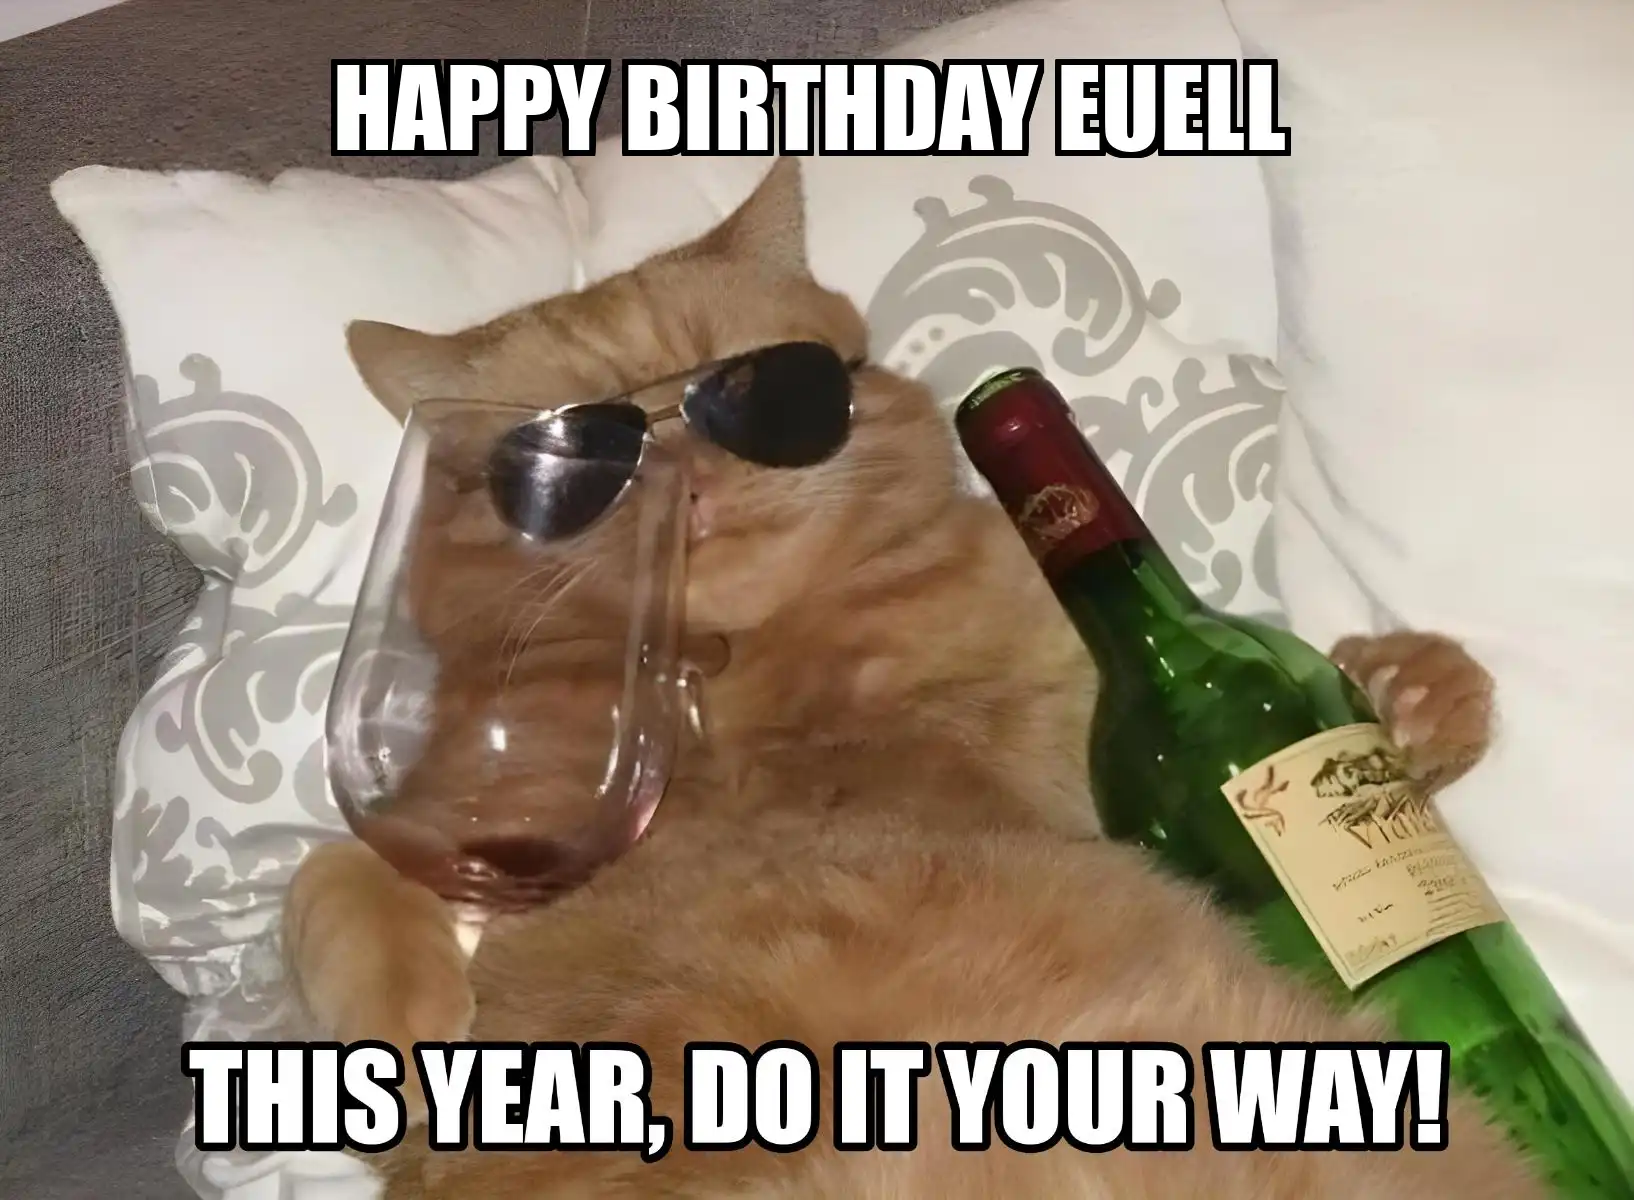 Happy Birthday Euell This Year Do It Your Way Meme